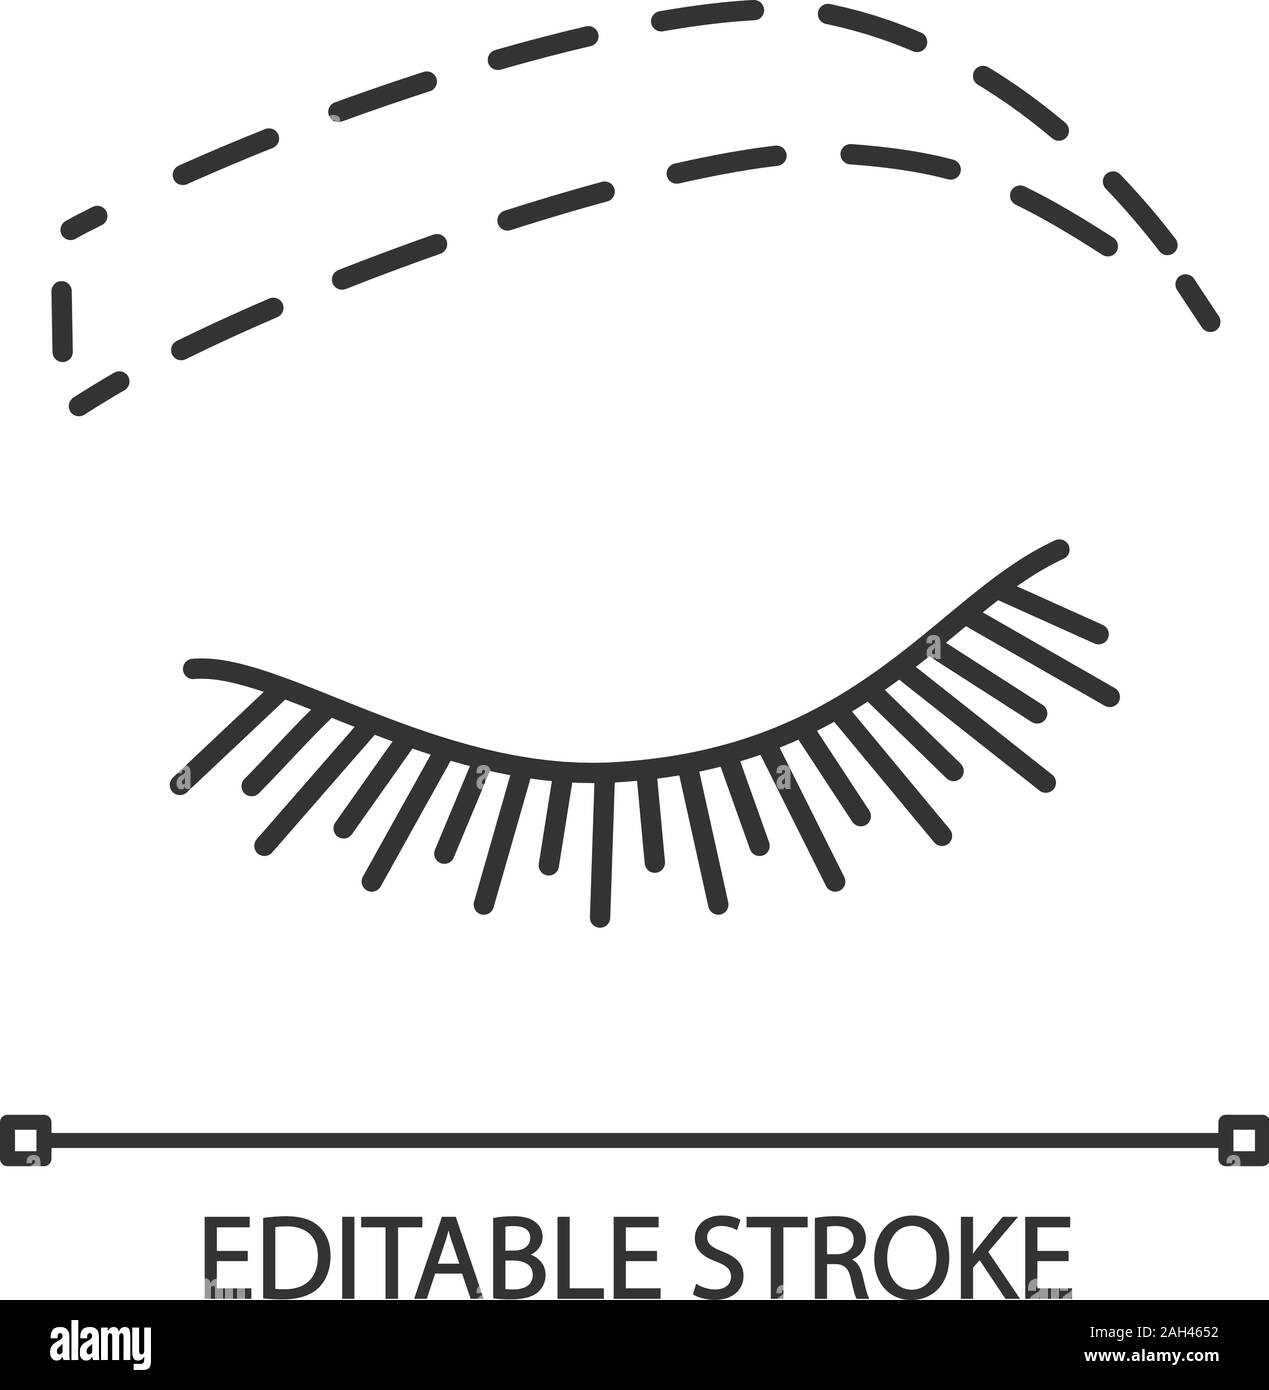 Eyebrow contouring linear icon. Thin line illustration. Brows shaping. Eyebrow makeup. Brows microblading or tattooing preparation. Contour symbol. Ve Stock Vector